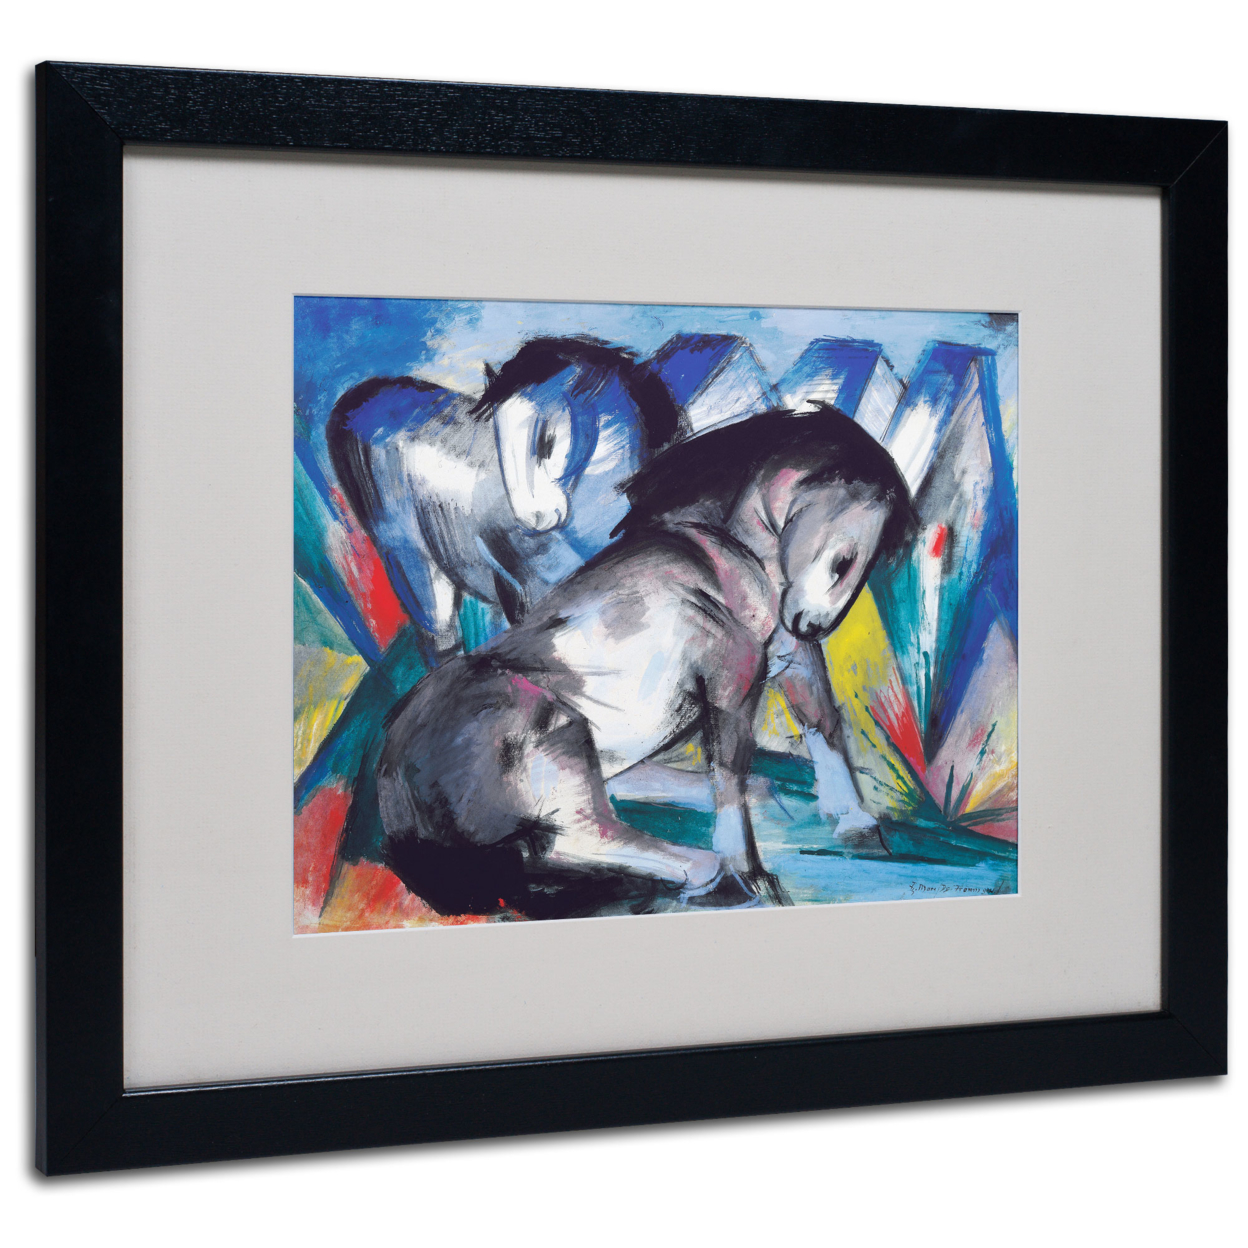 Franz Marc 'Two Horses 1913' Black Wooden Framed Art 18 X 22 Inches